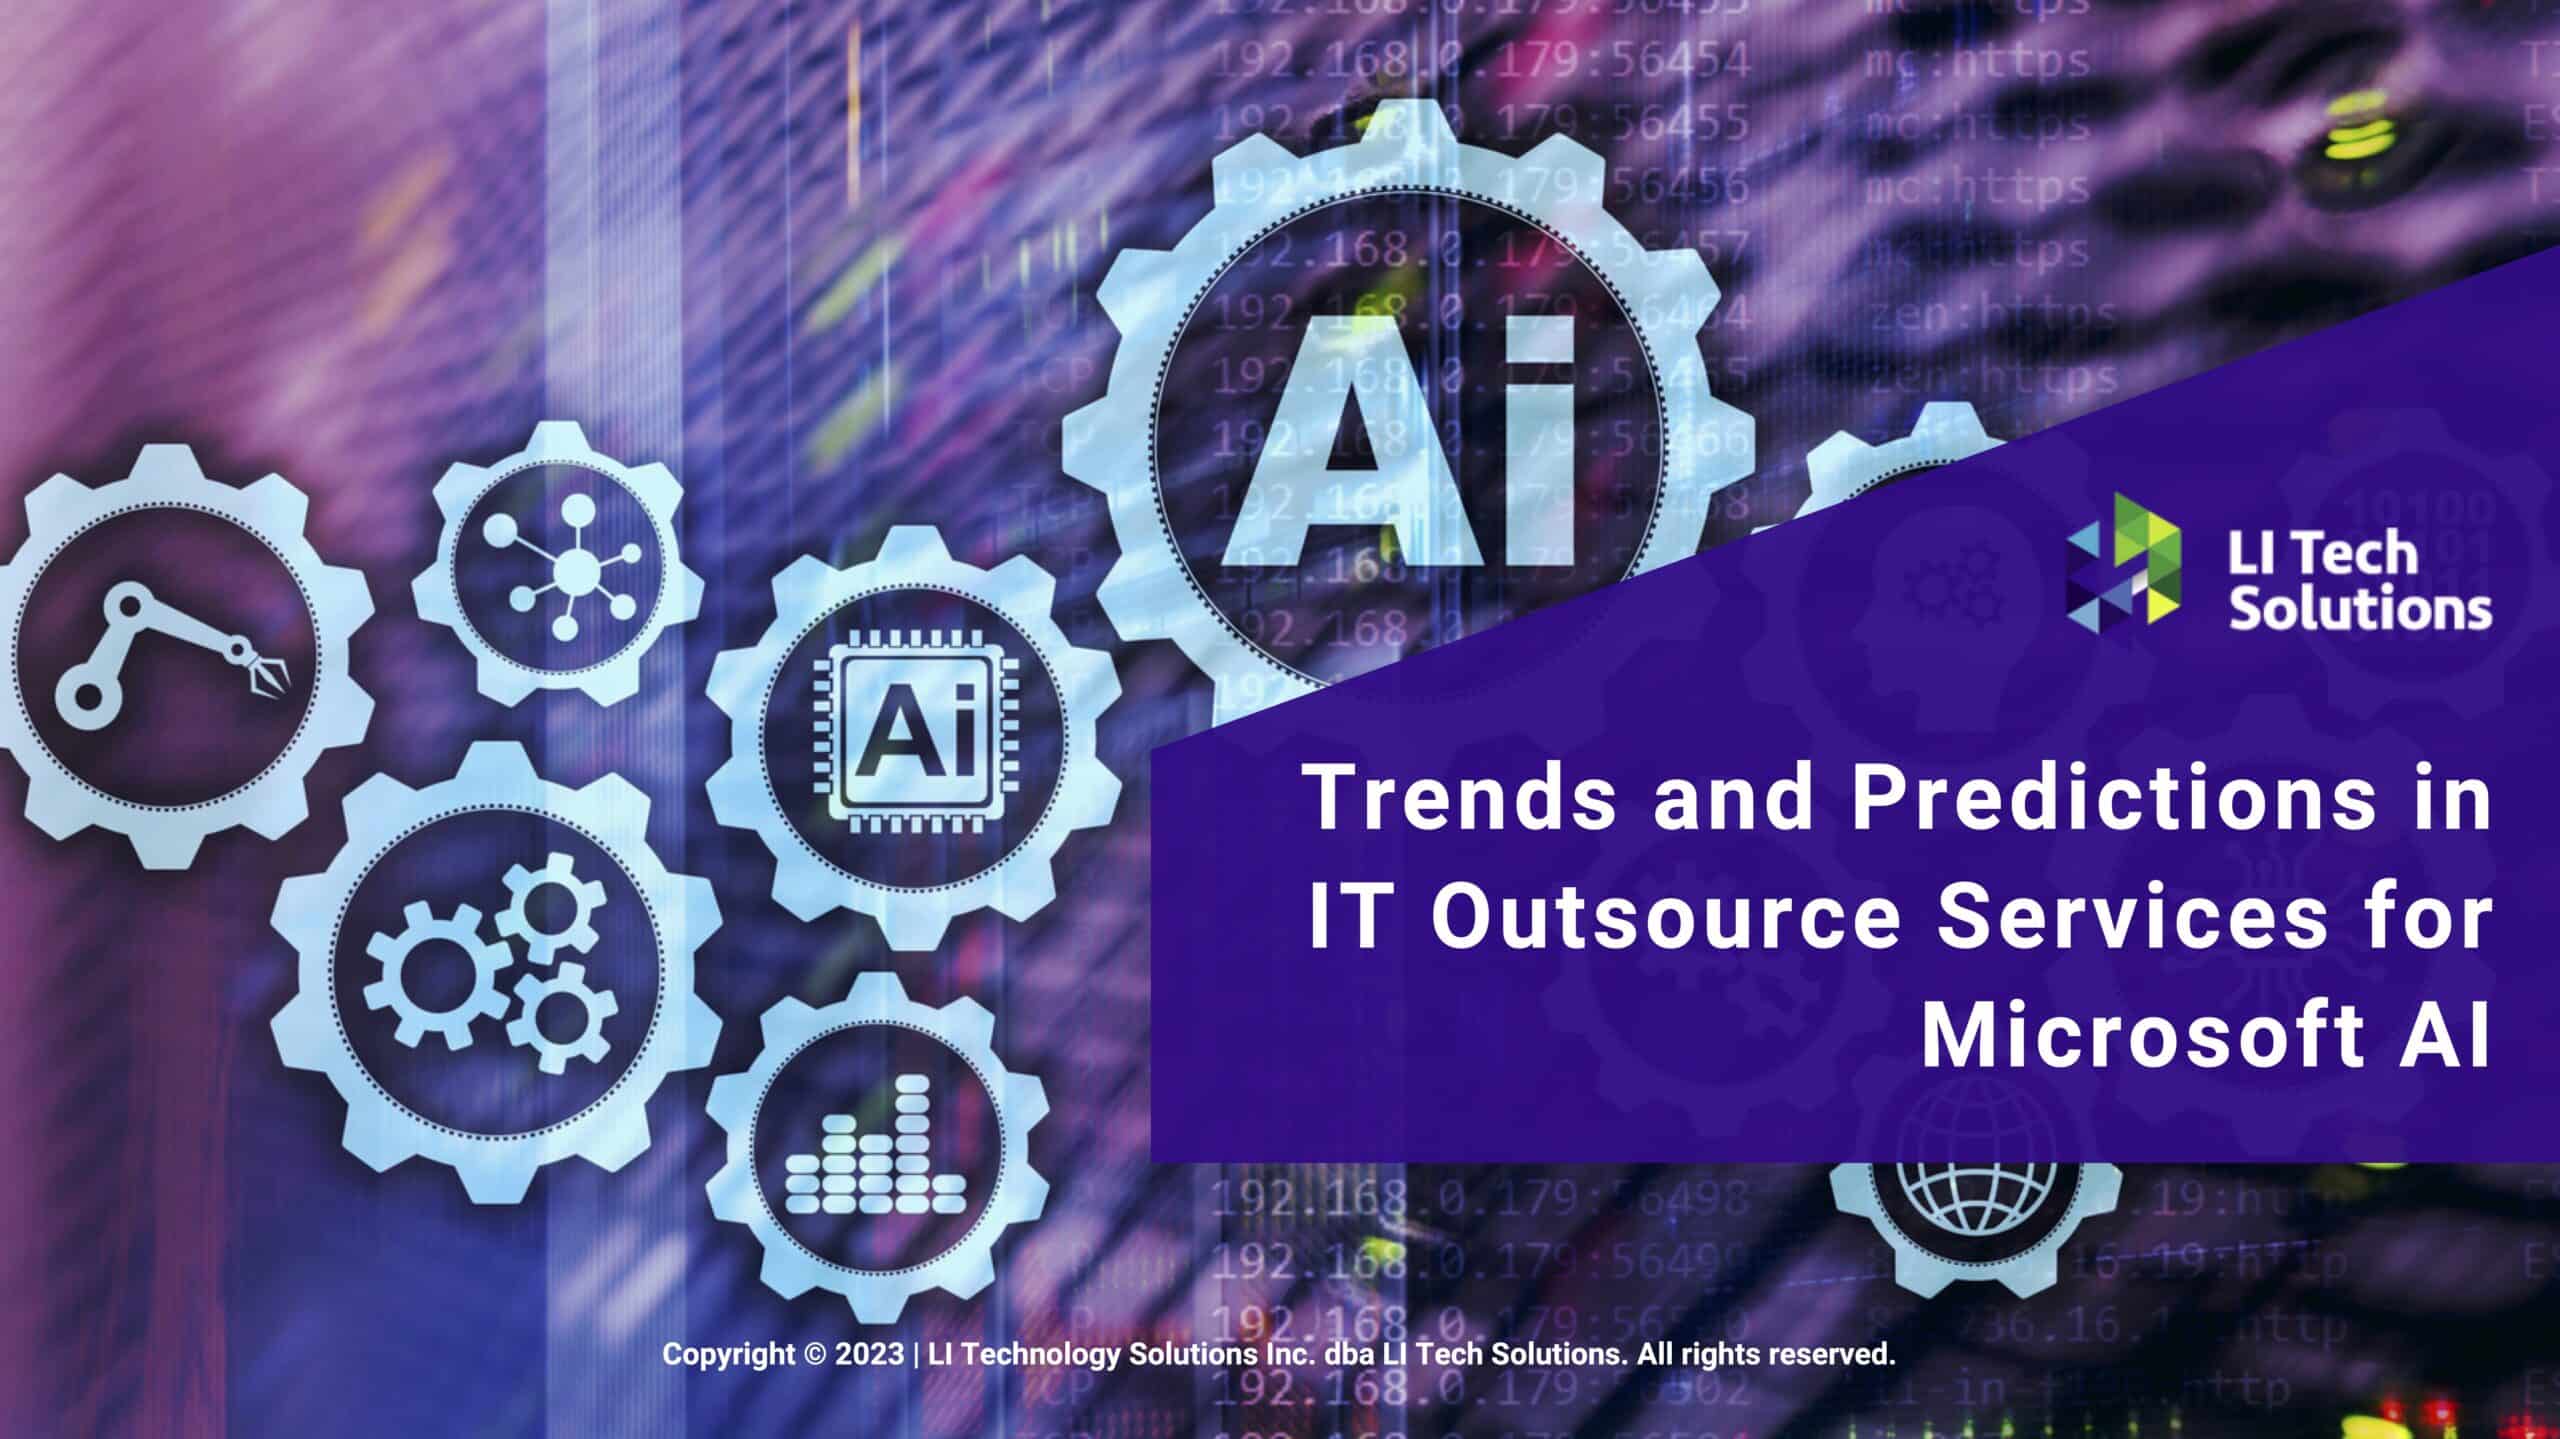 Featured: AI hi-tech business technology concept- Trends and Predictions in IT Outsource Services for Microsoft AI